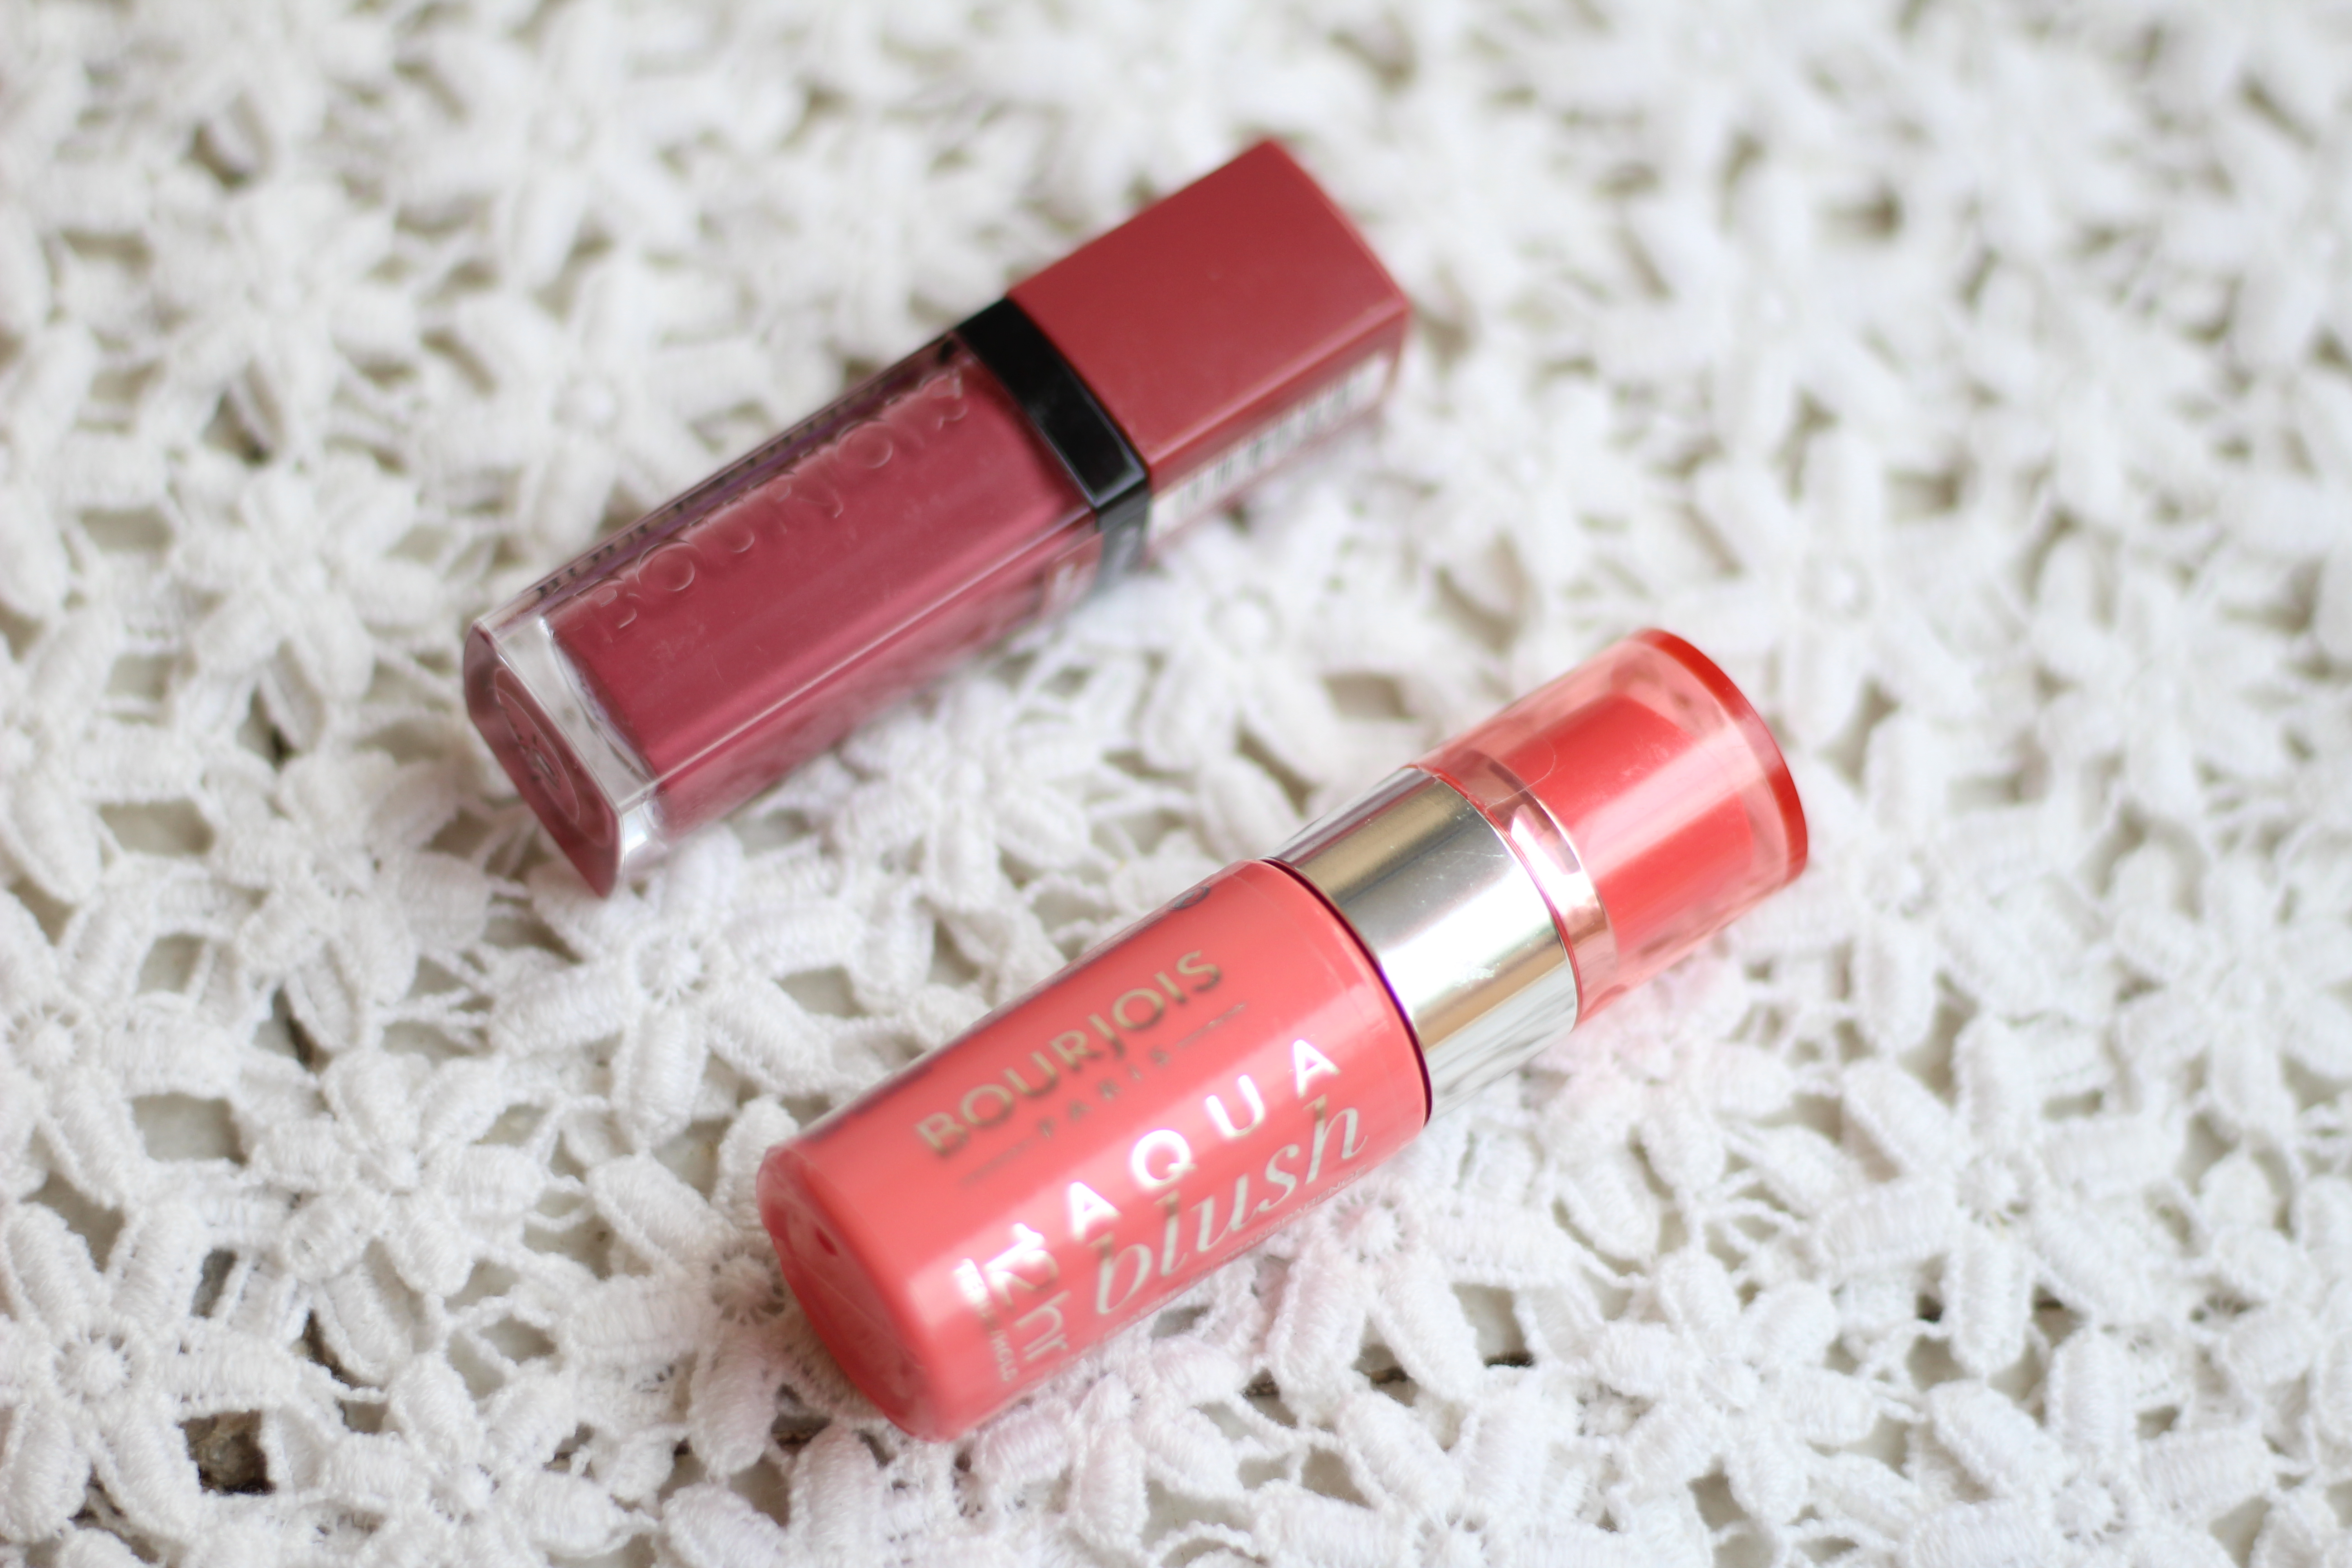 Bourjois Products